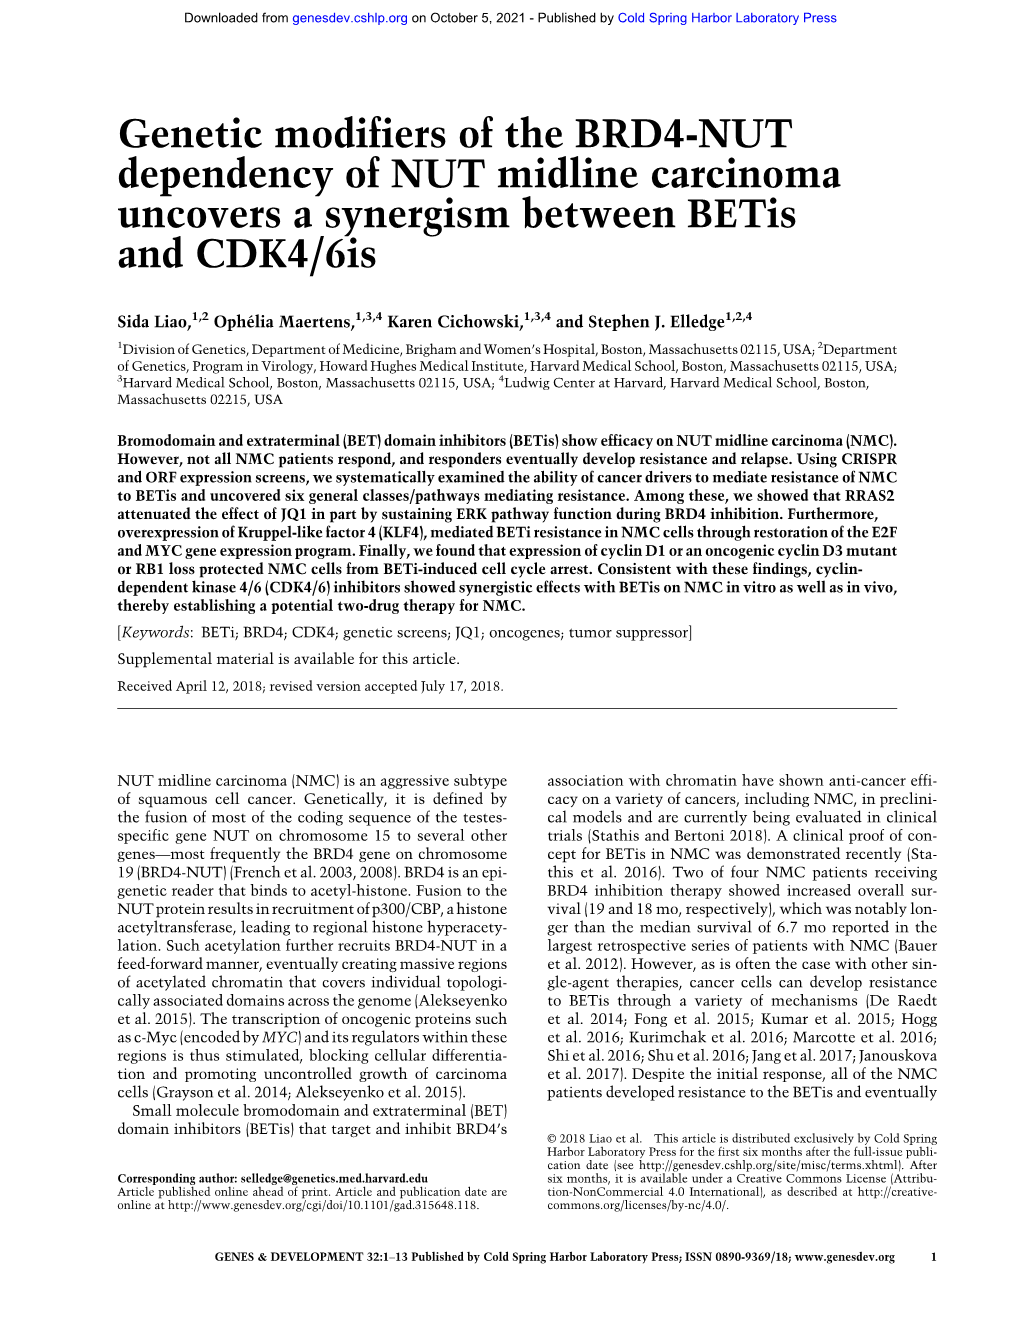 Genetic Modifiers of the BRD4-NUT Dependency of NUT Midline Carcinoma Uncovers a Synergism Between Betis and CDK4/6Is